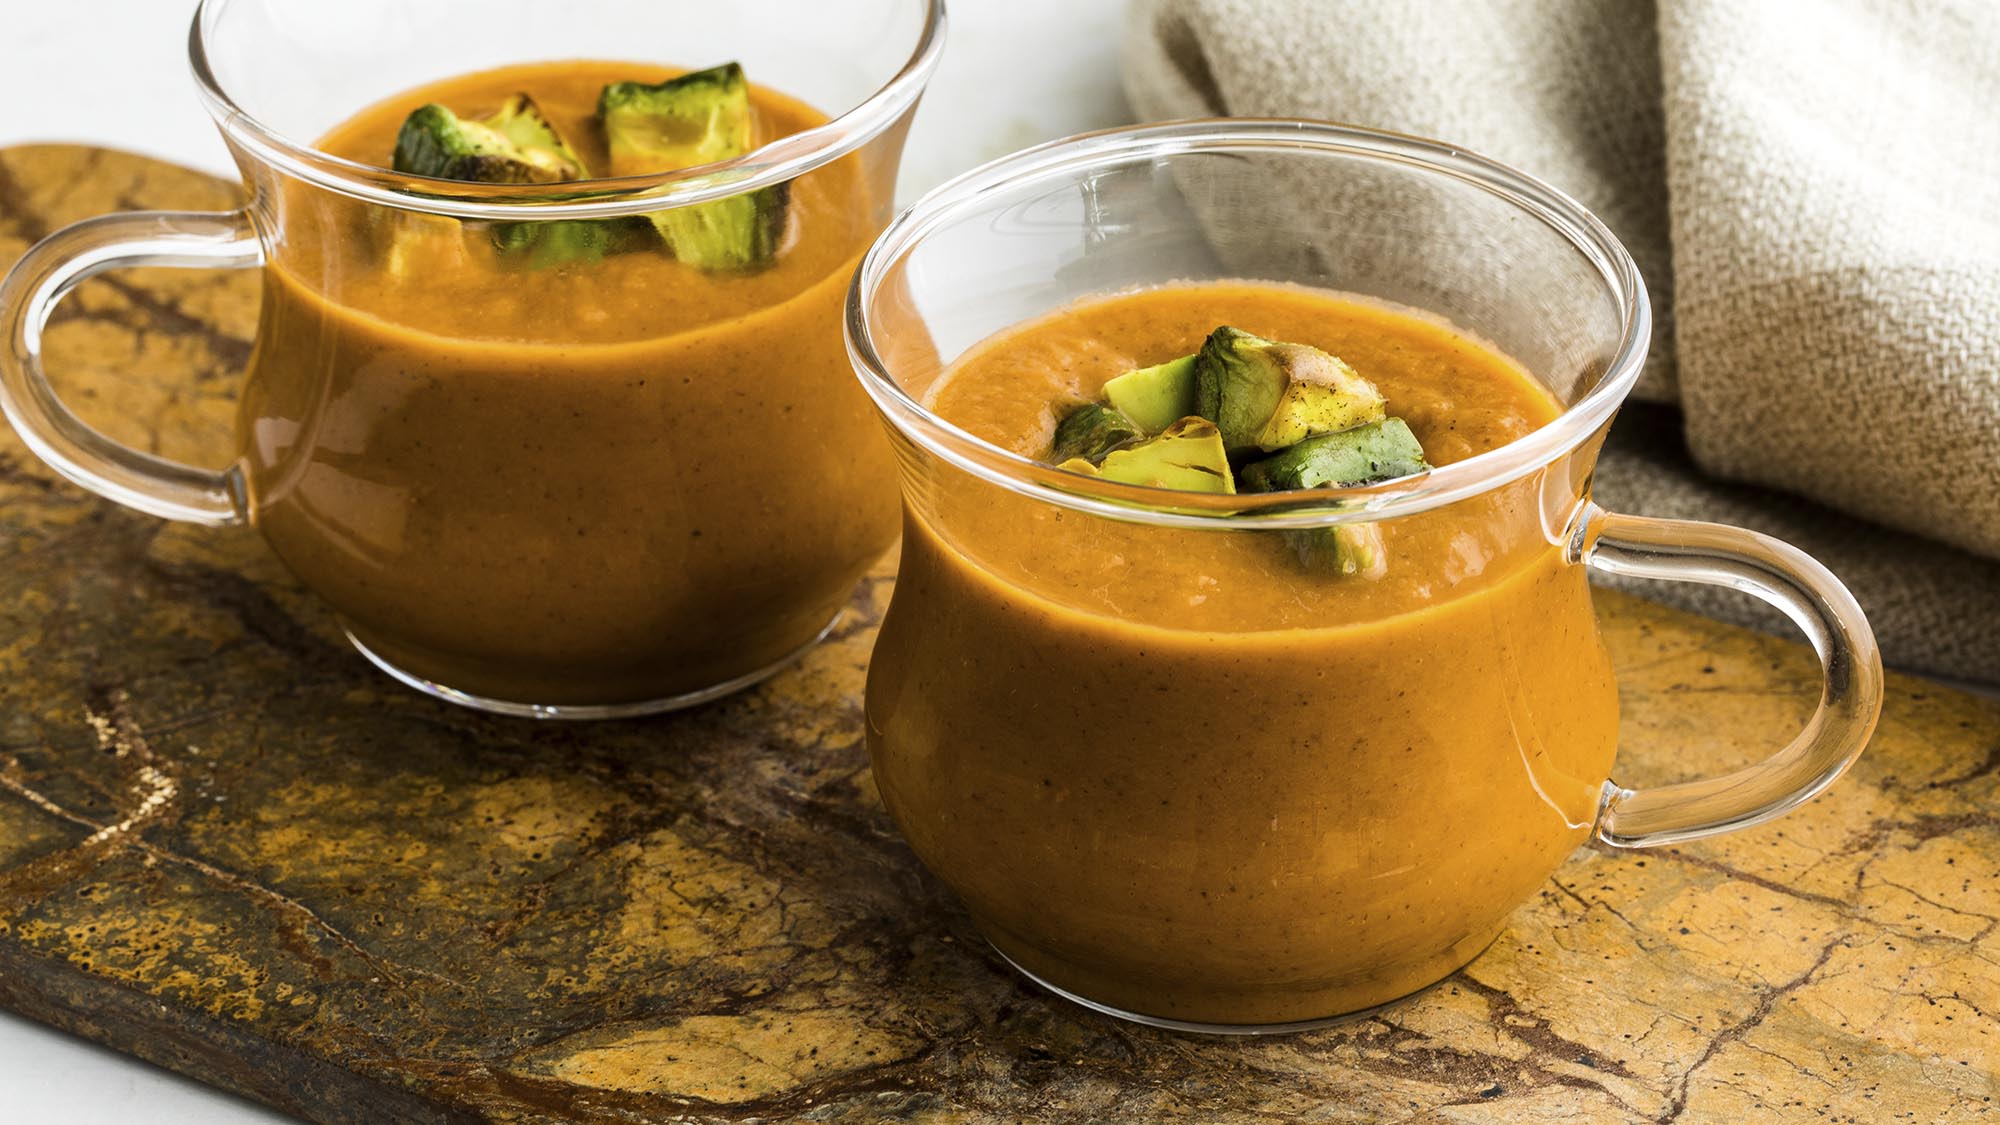 roasted_vegetable_soup_with_roasted_avocado_2000x1125.jpg